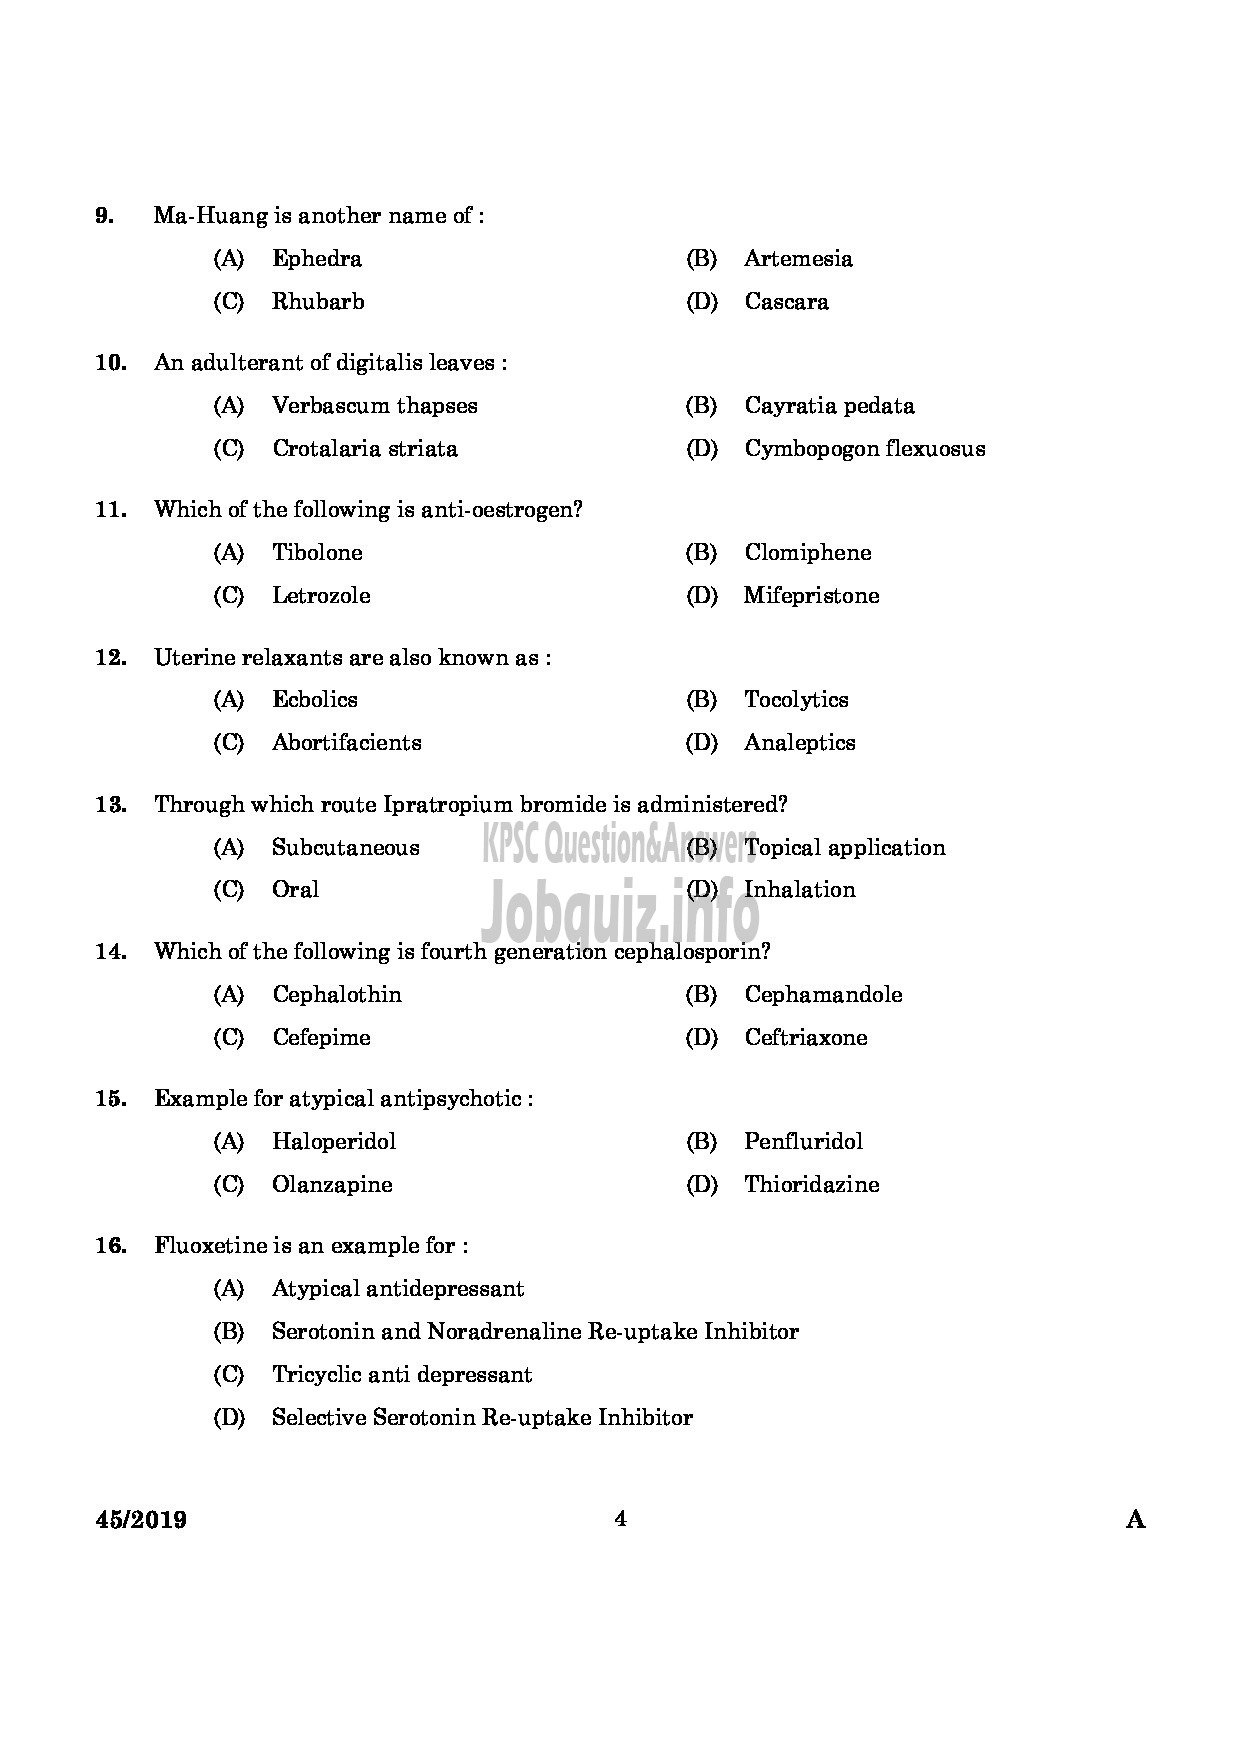 Kerala PSC Question Paper - Pharmacist Gr II Health Services/IMS English -2